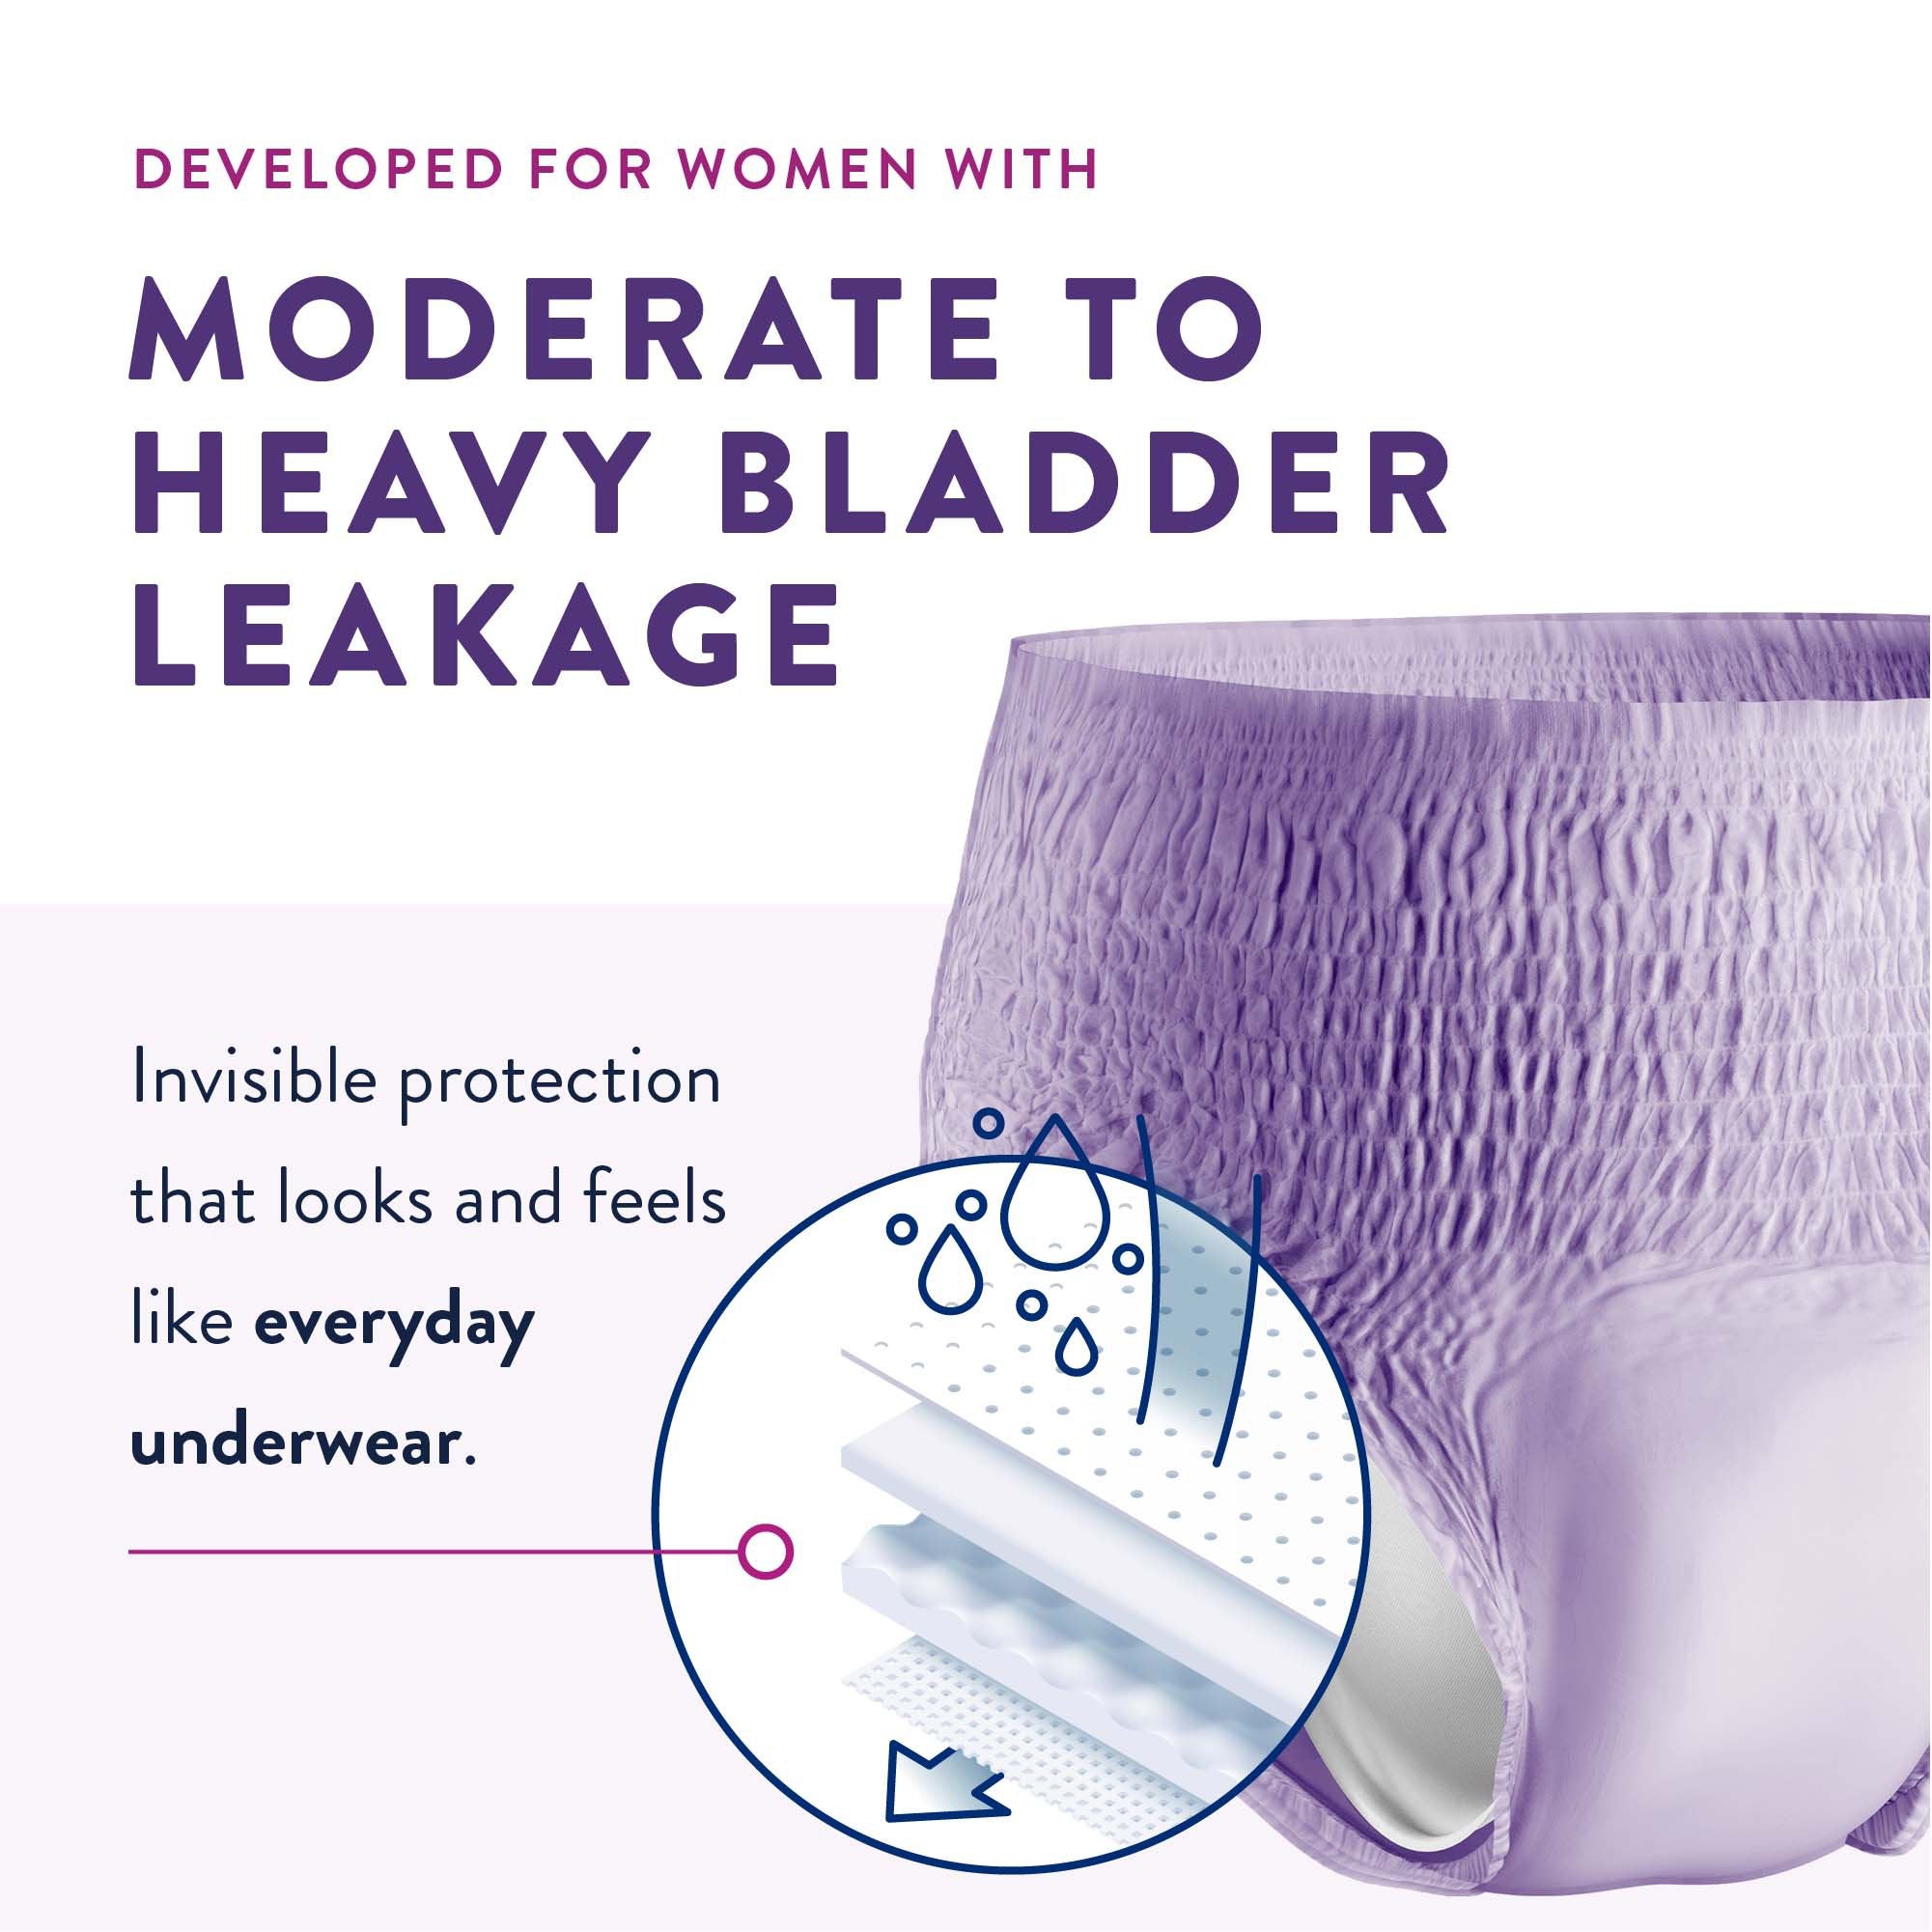 Female Adult Absorbent Underwear Prevail Per-Fit Women Pull On with Tear Away Seams X-Large Disposable Moderate Absorbency